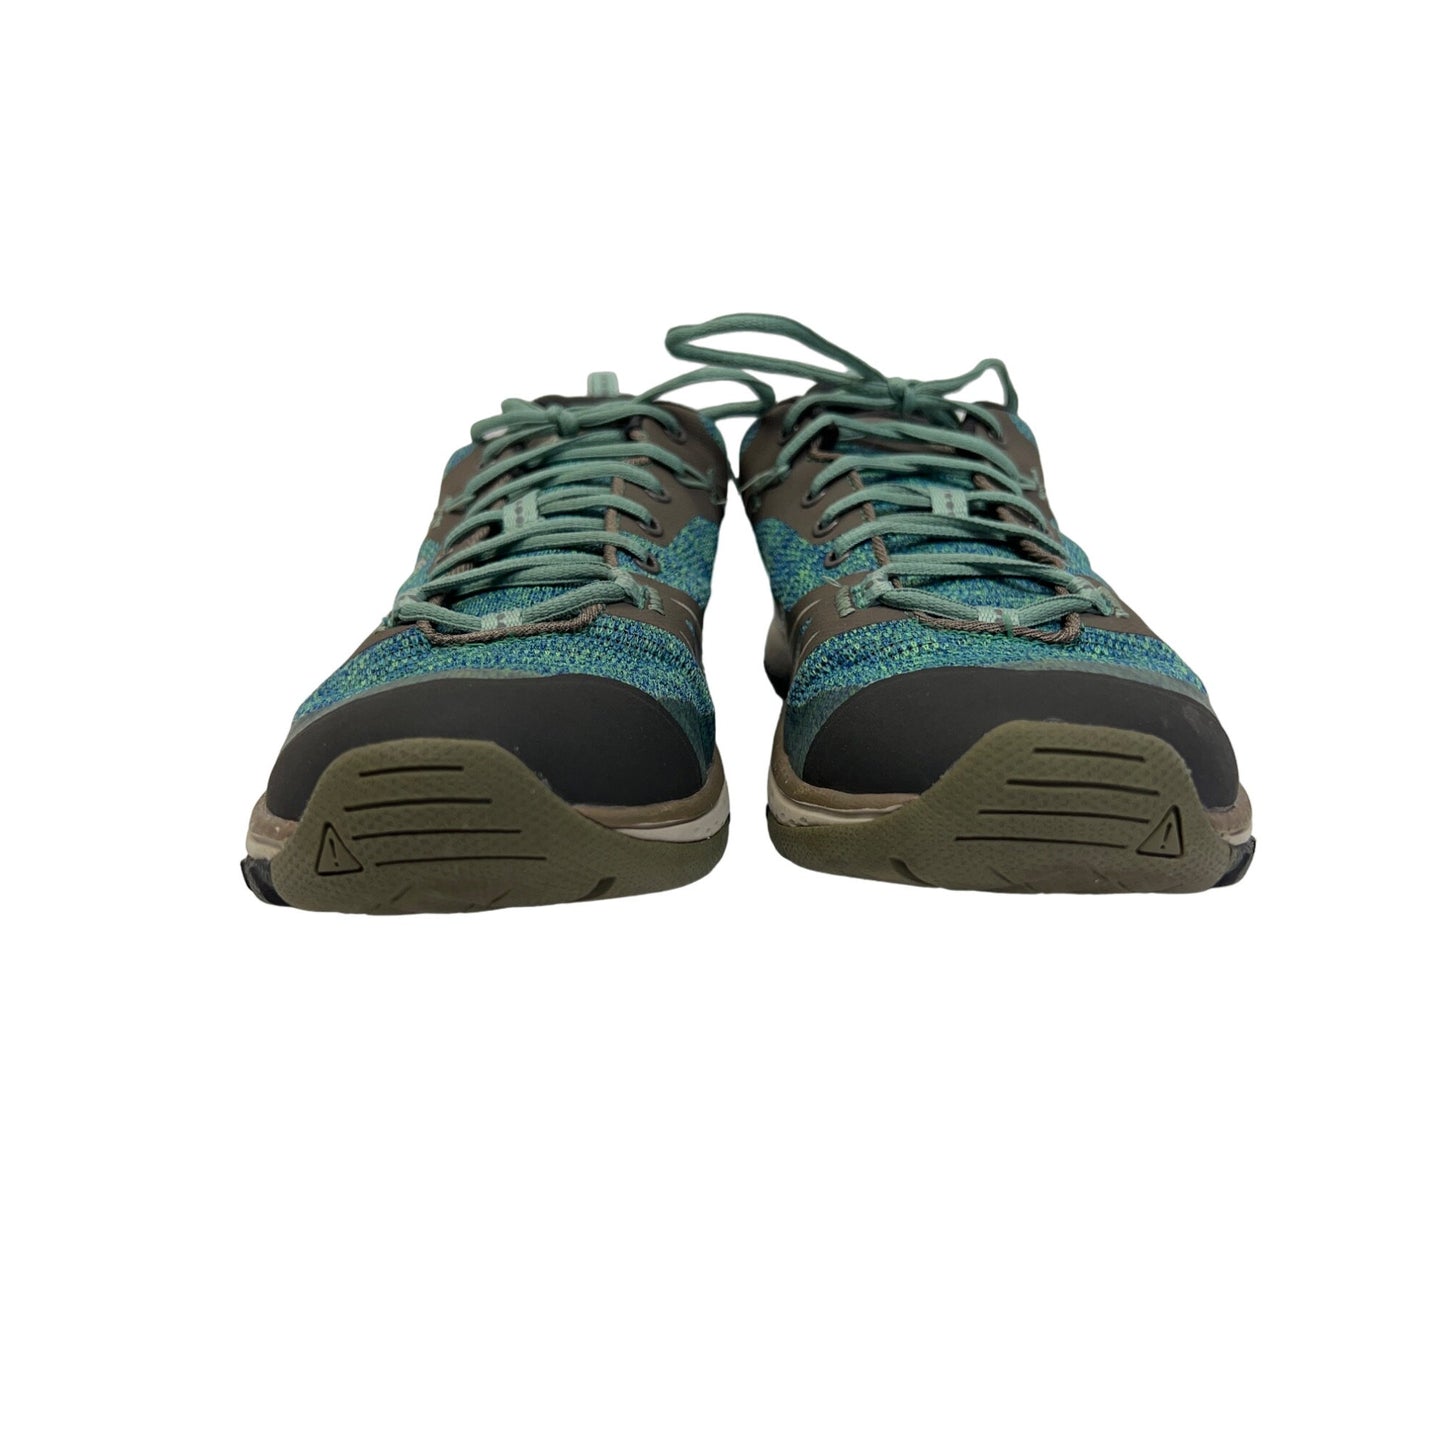 Keen Dry Terradora Low Teal and Gray Hiking Trail Show